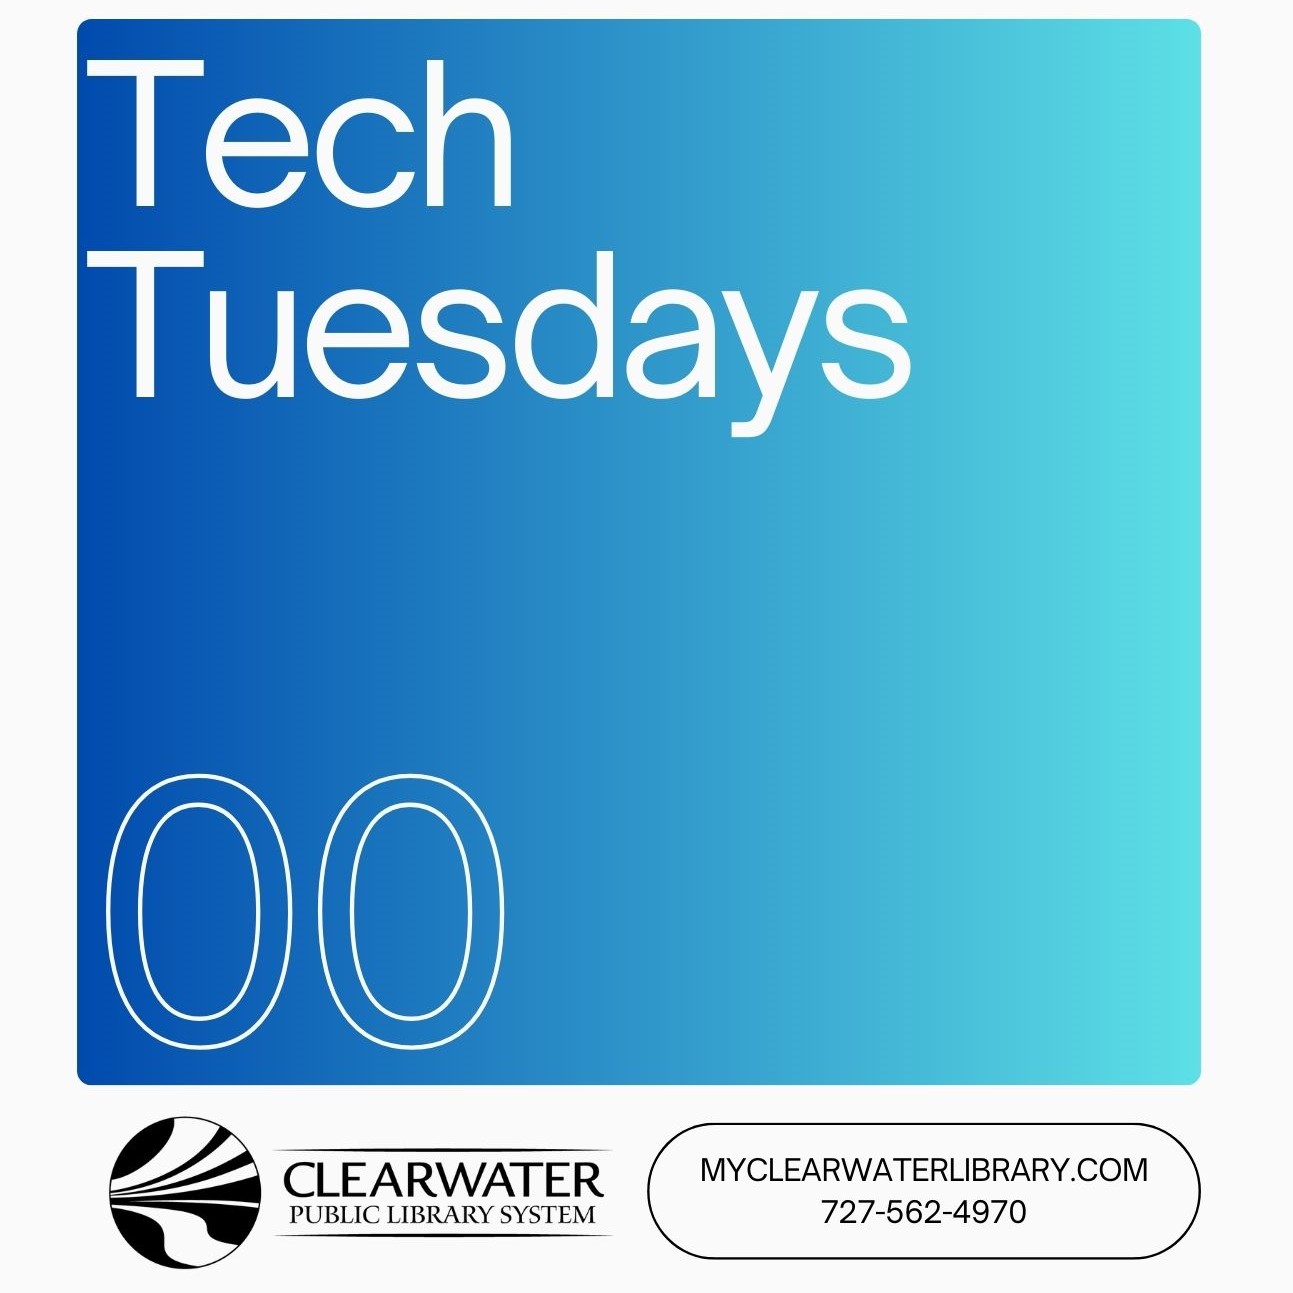 Blue gradient square that says Tech Tuesdays with Clearwater Library System logo. Clearwater library website and phone number.